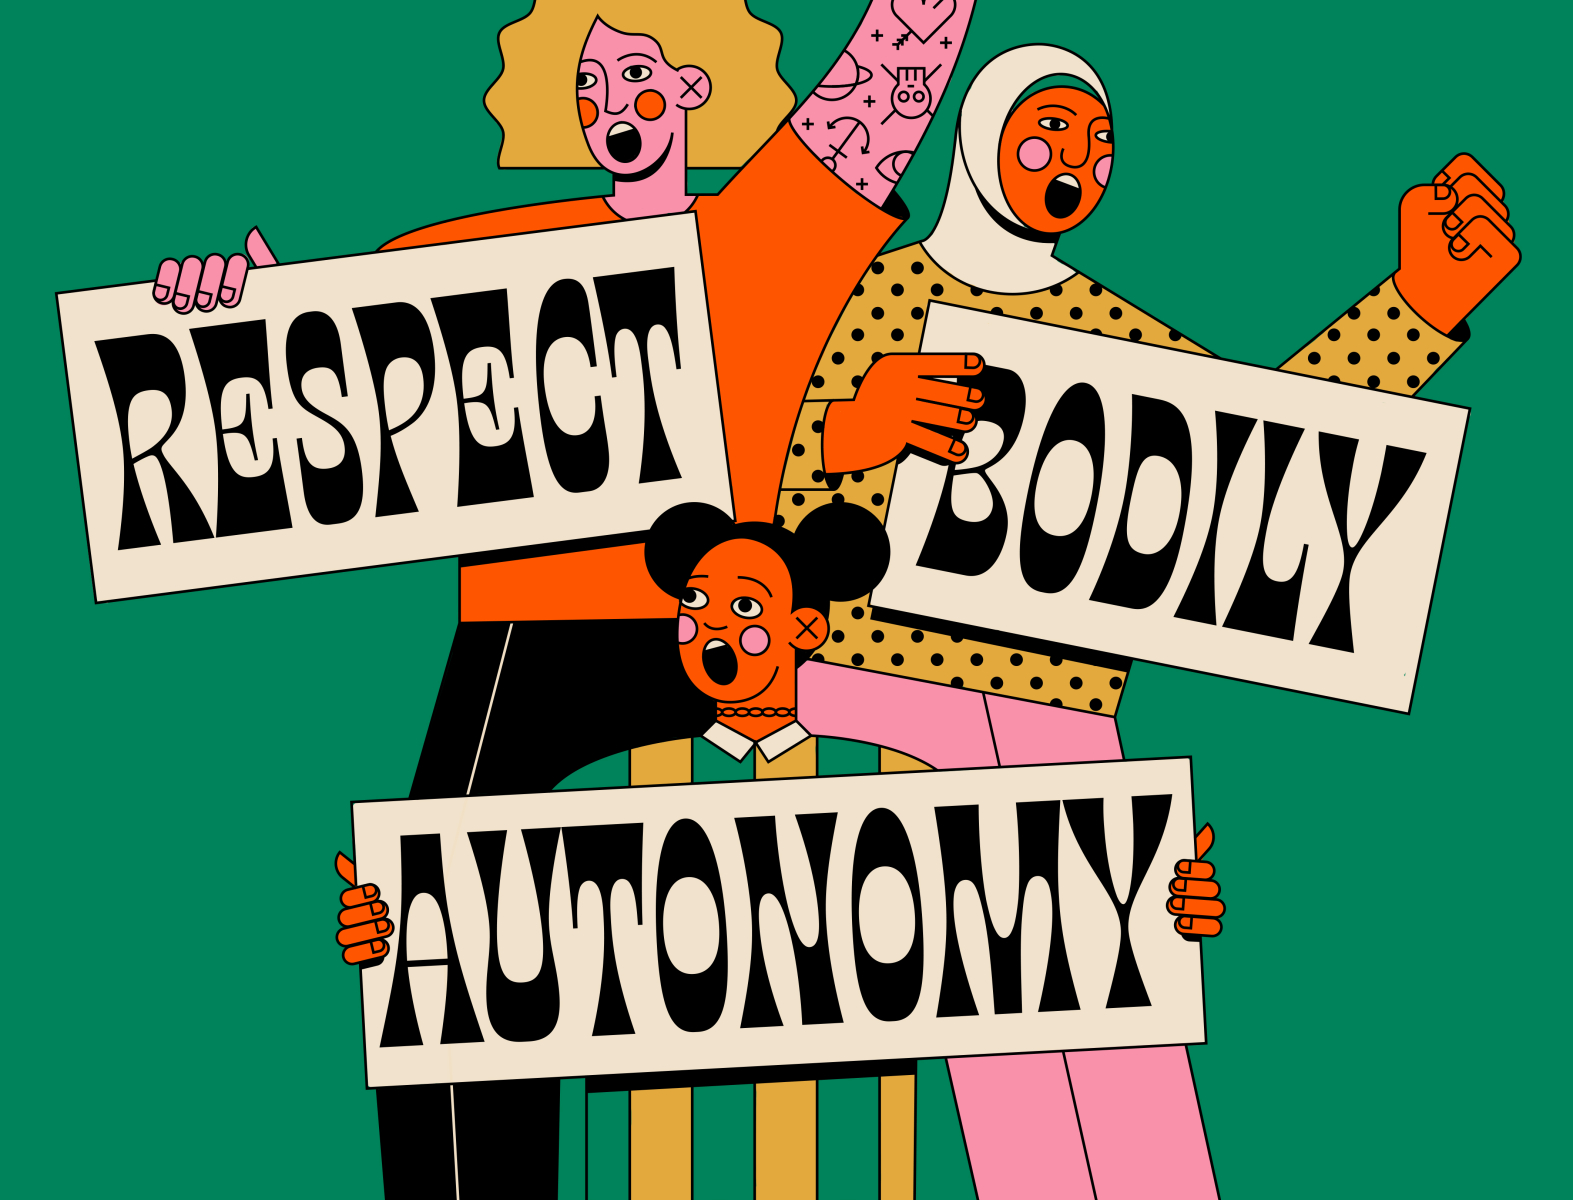 Respect Bodily Autonomy by Ryan Brewster on Dribbble